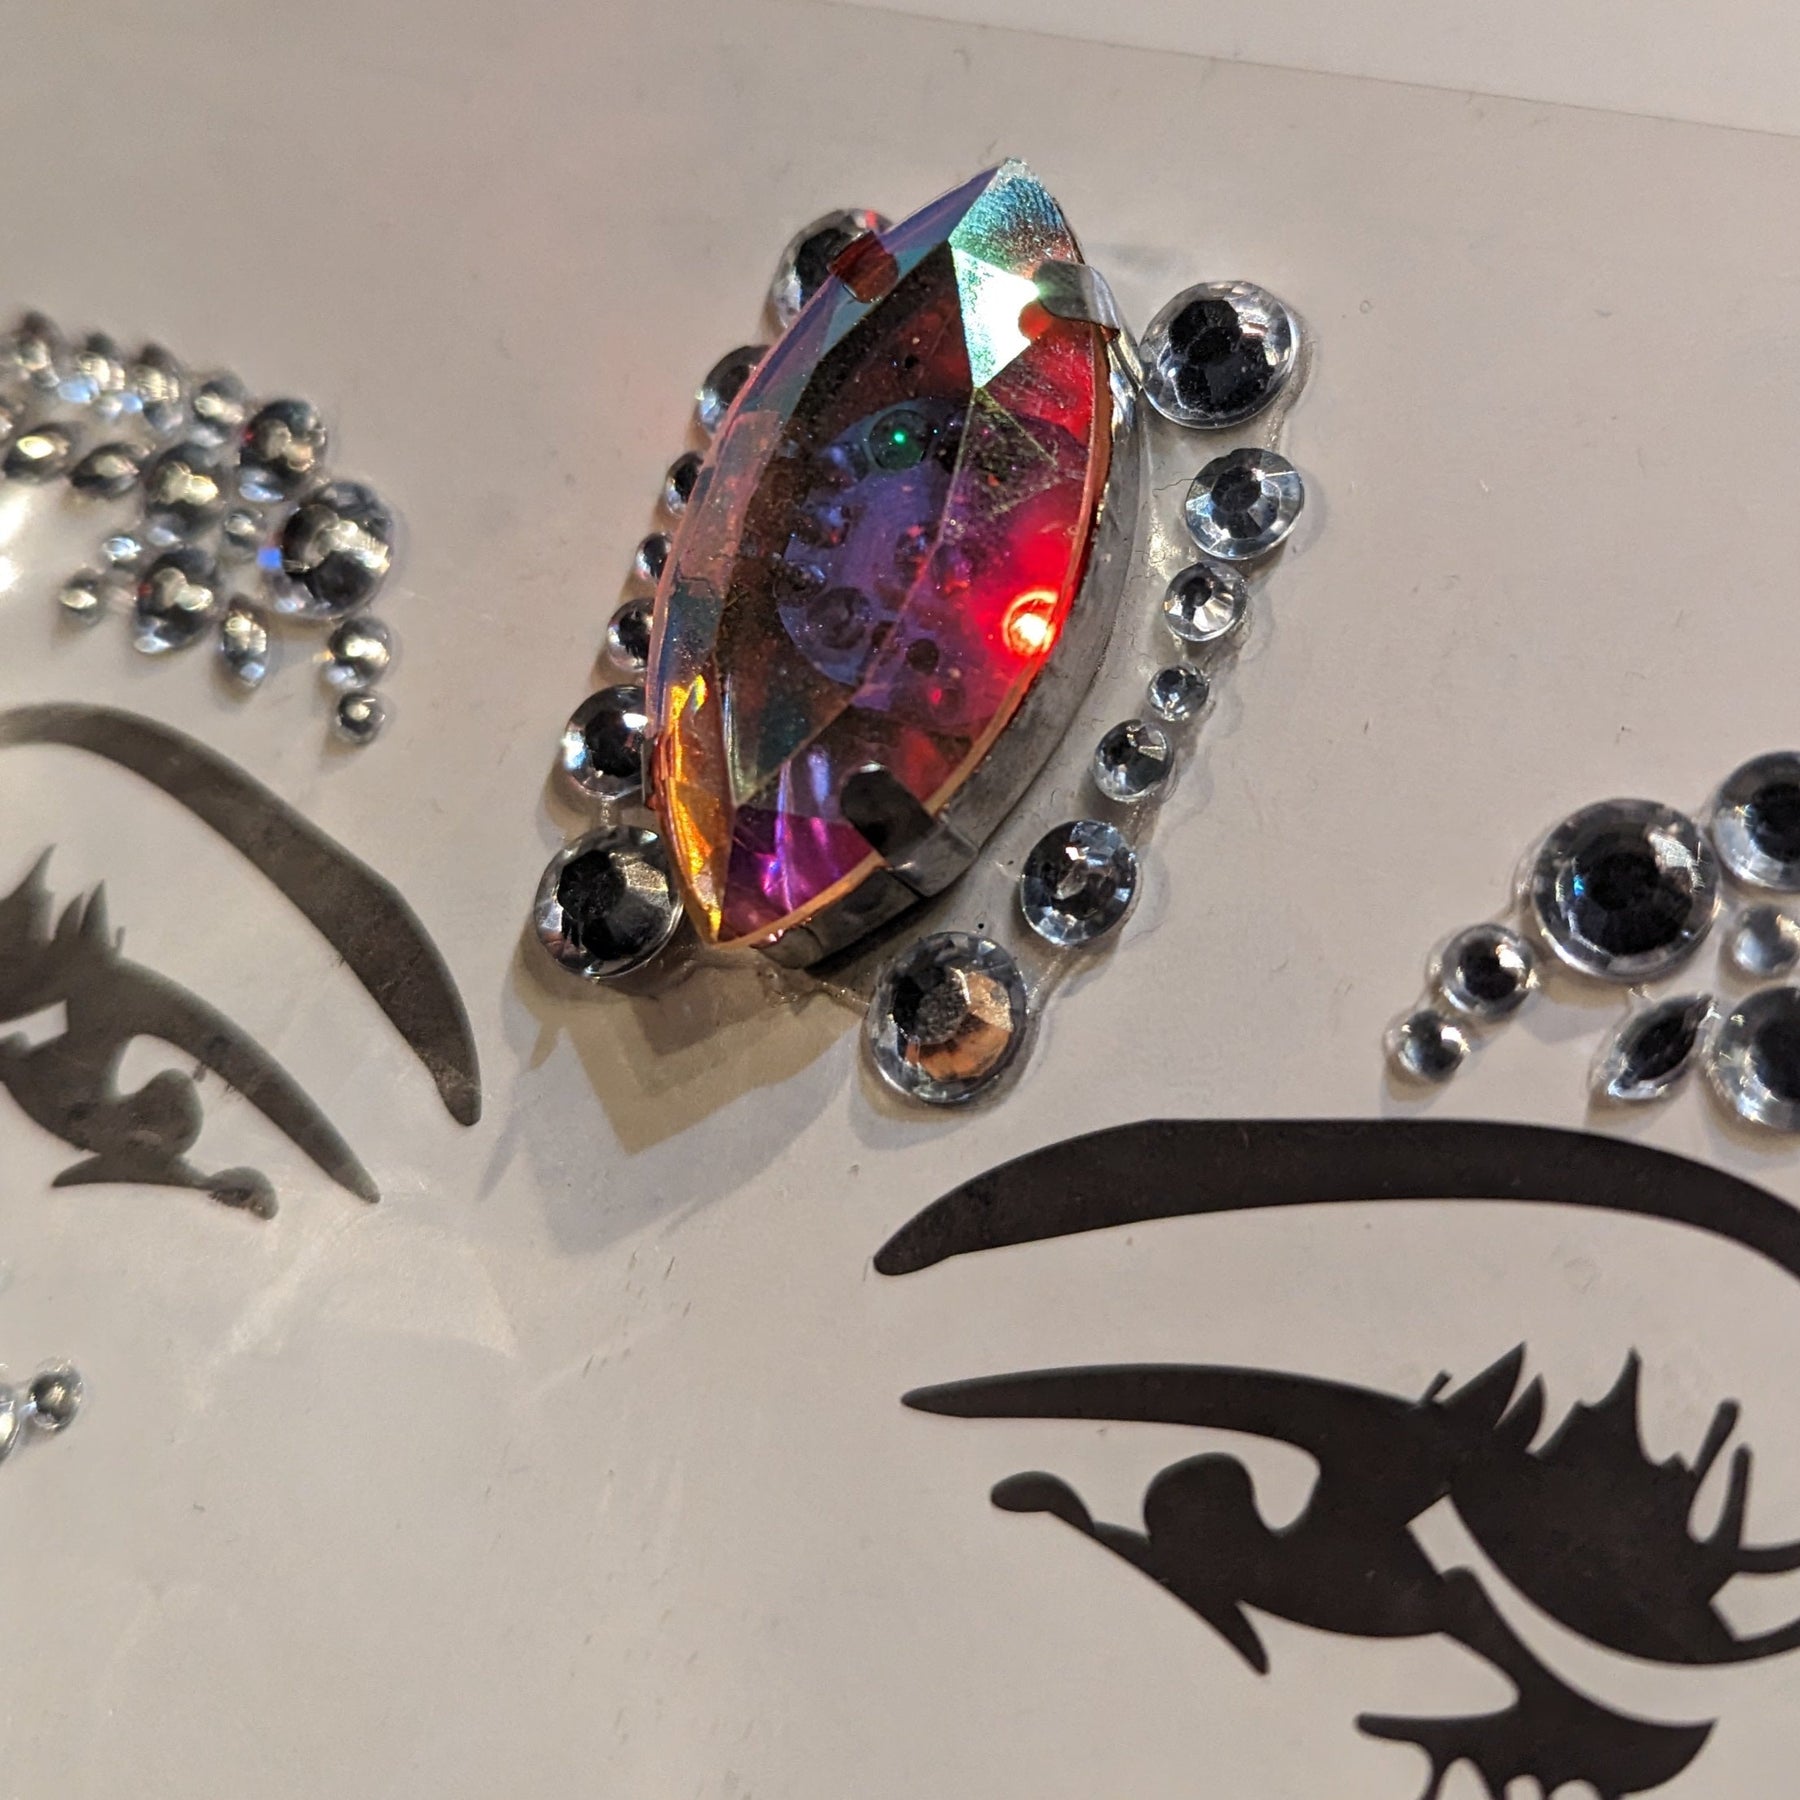 SAMPLE SALE - LED Face Jewelry Rhinestone Gems (Ships March Delivery) - FINAL SALE